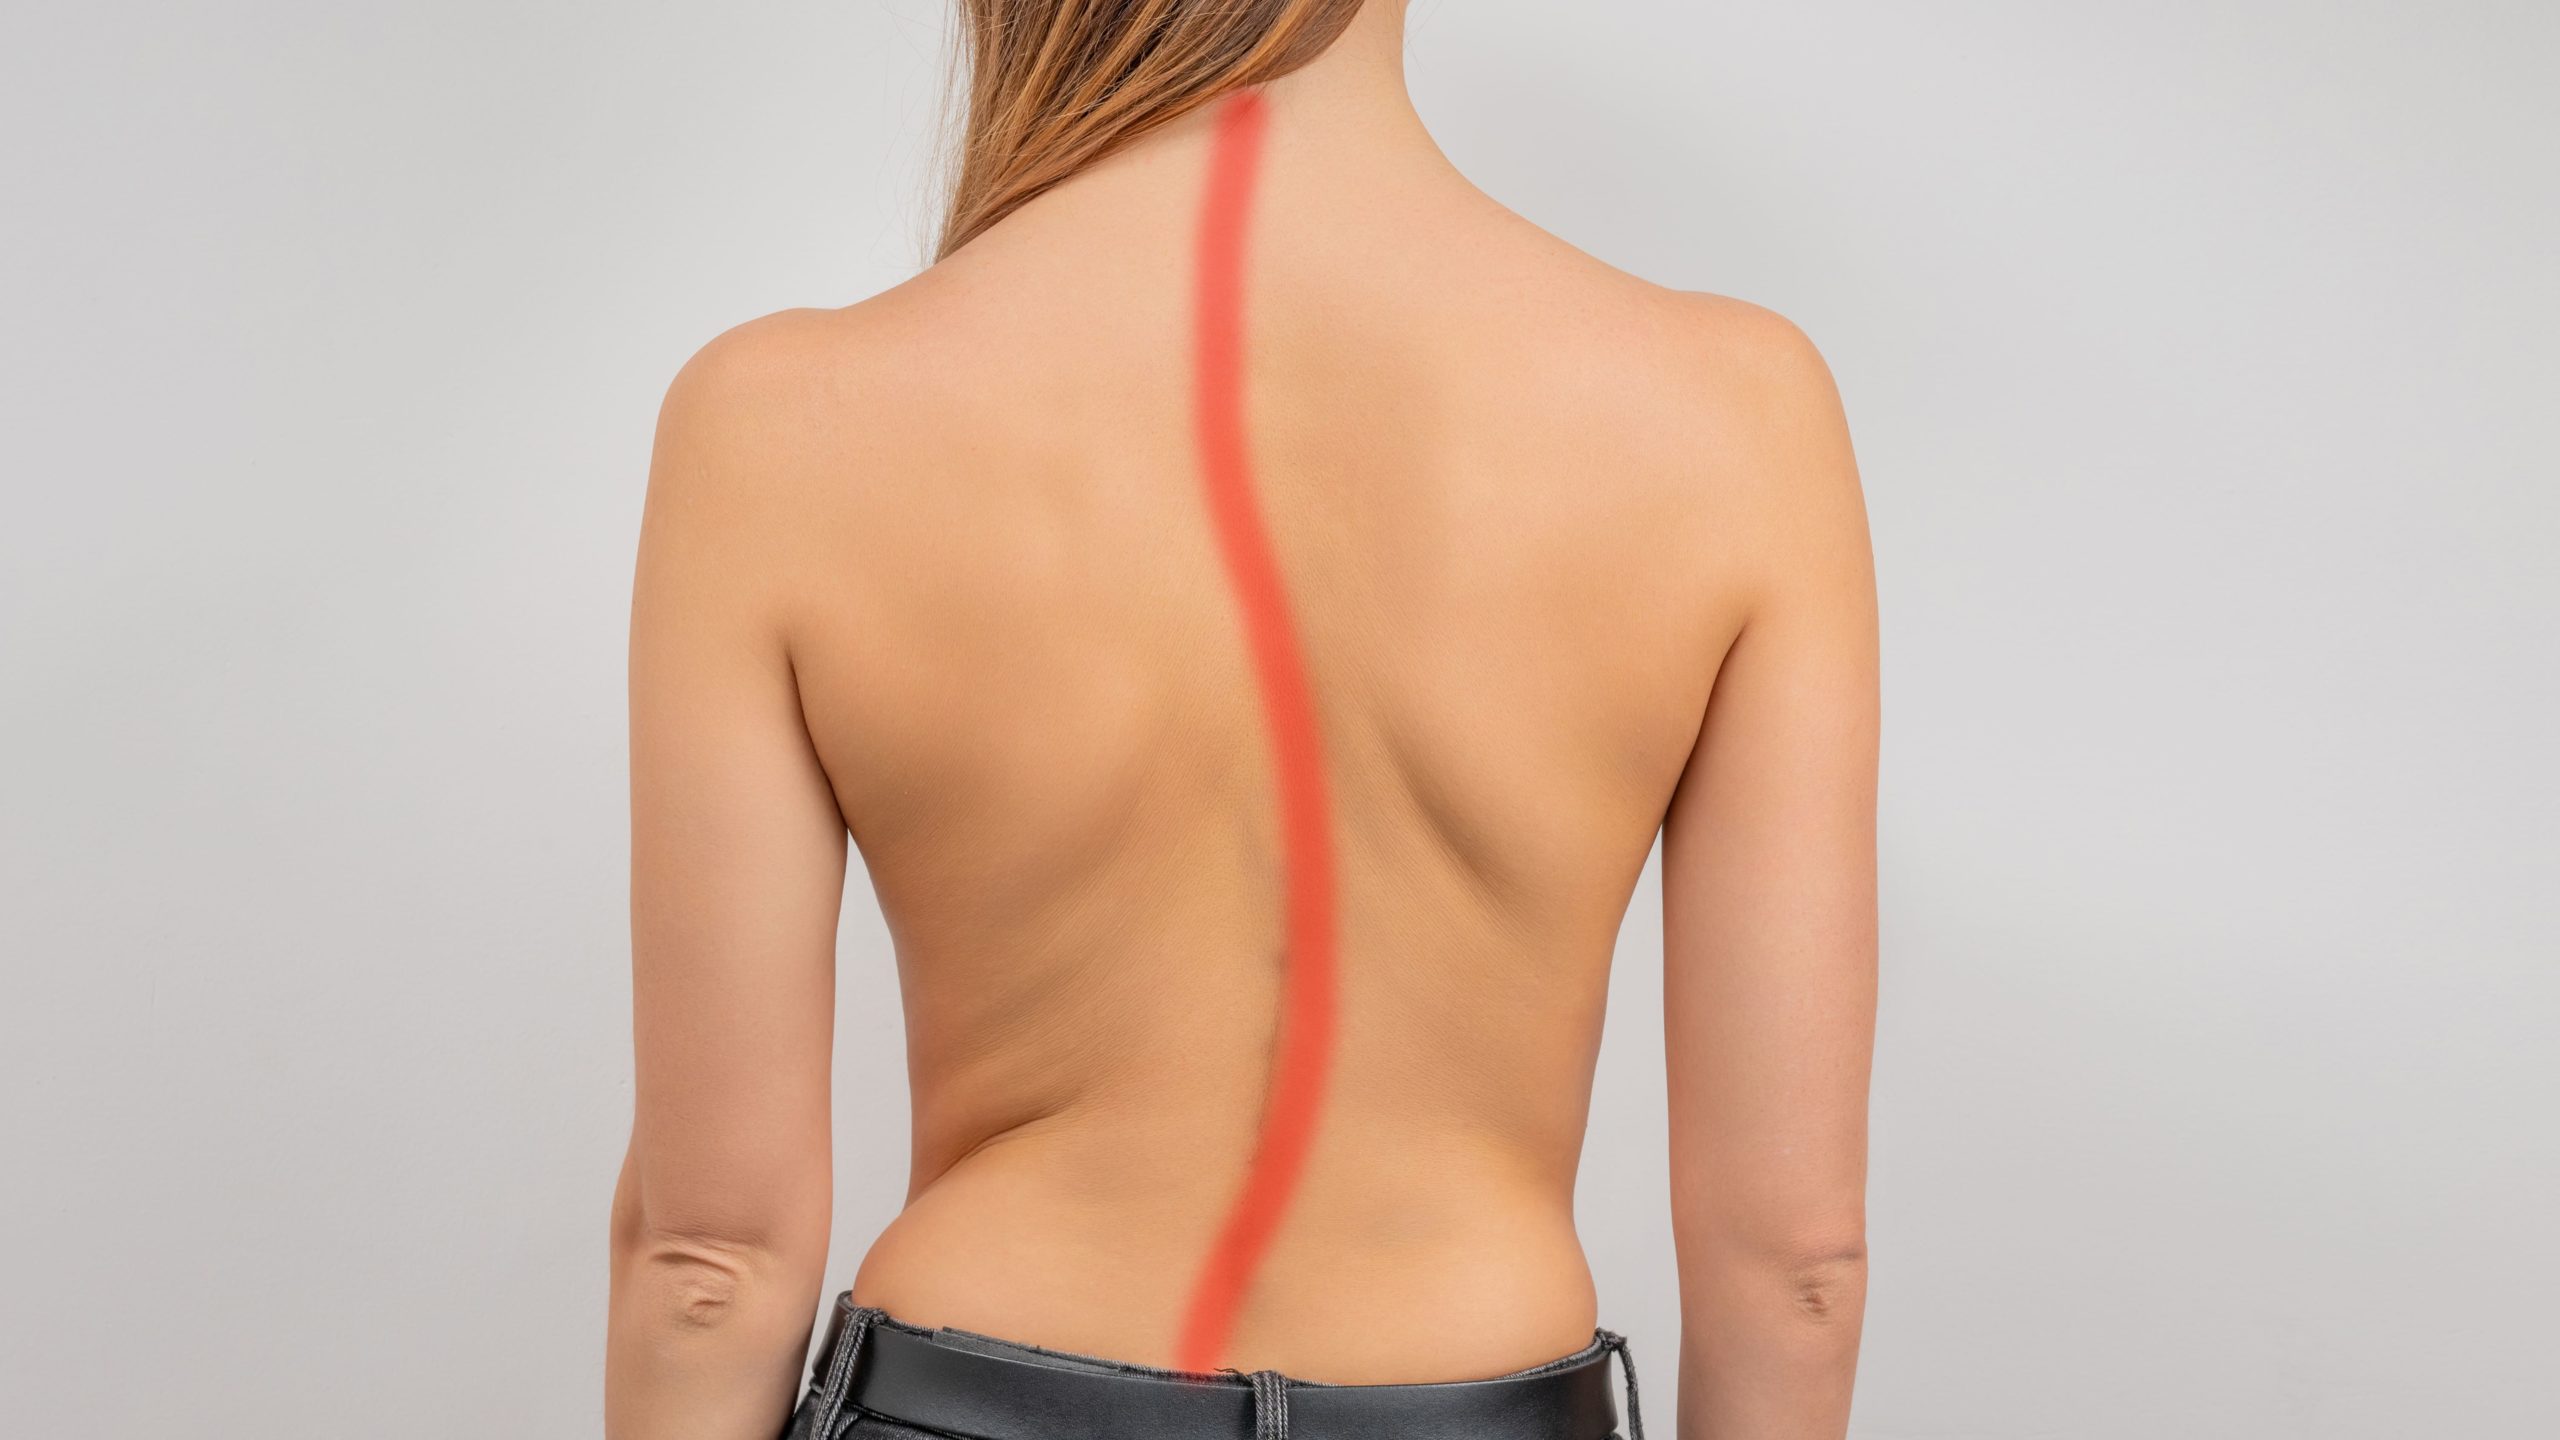 Chiropractic treatment for scoliosis